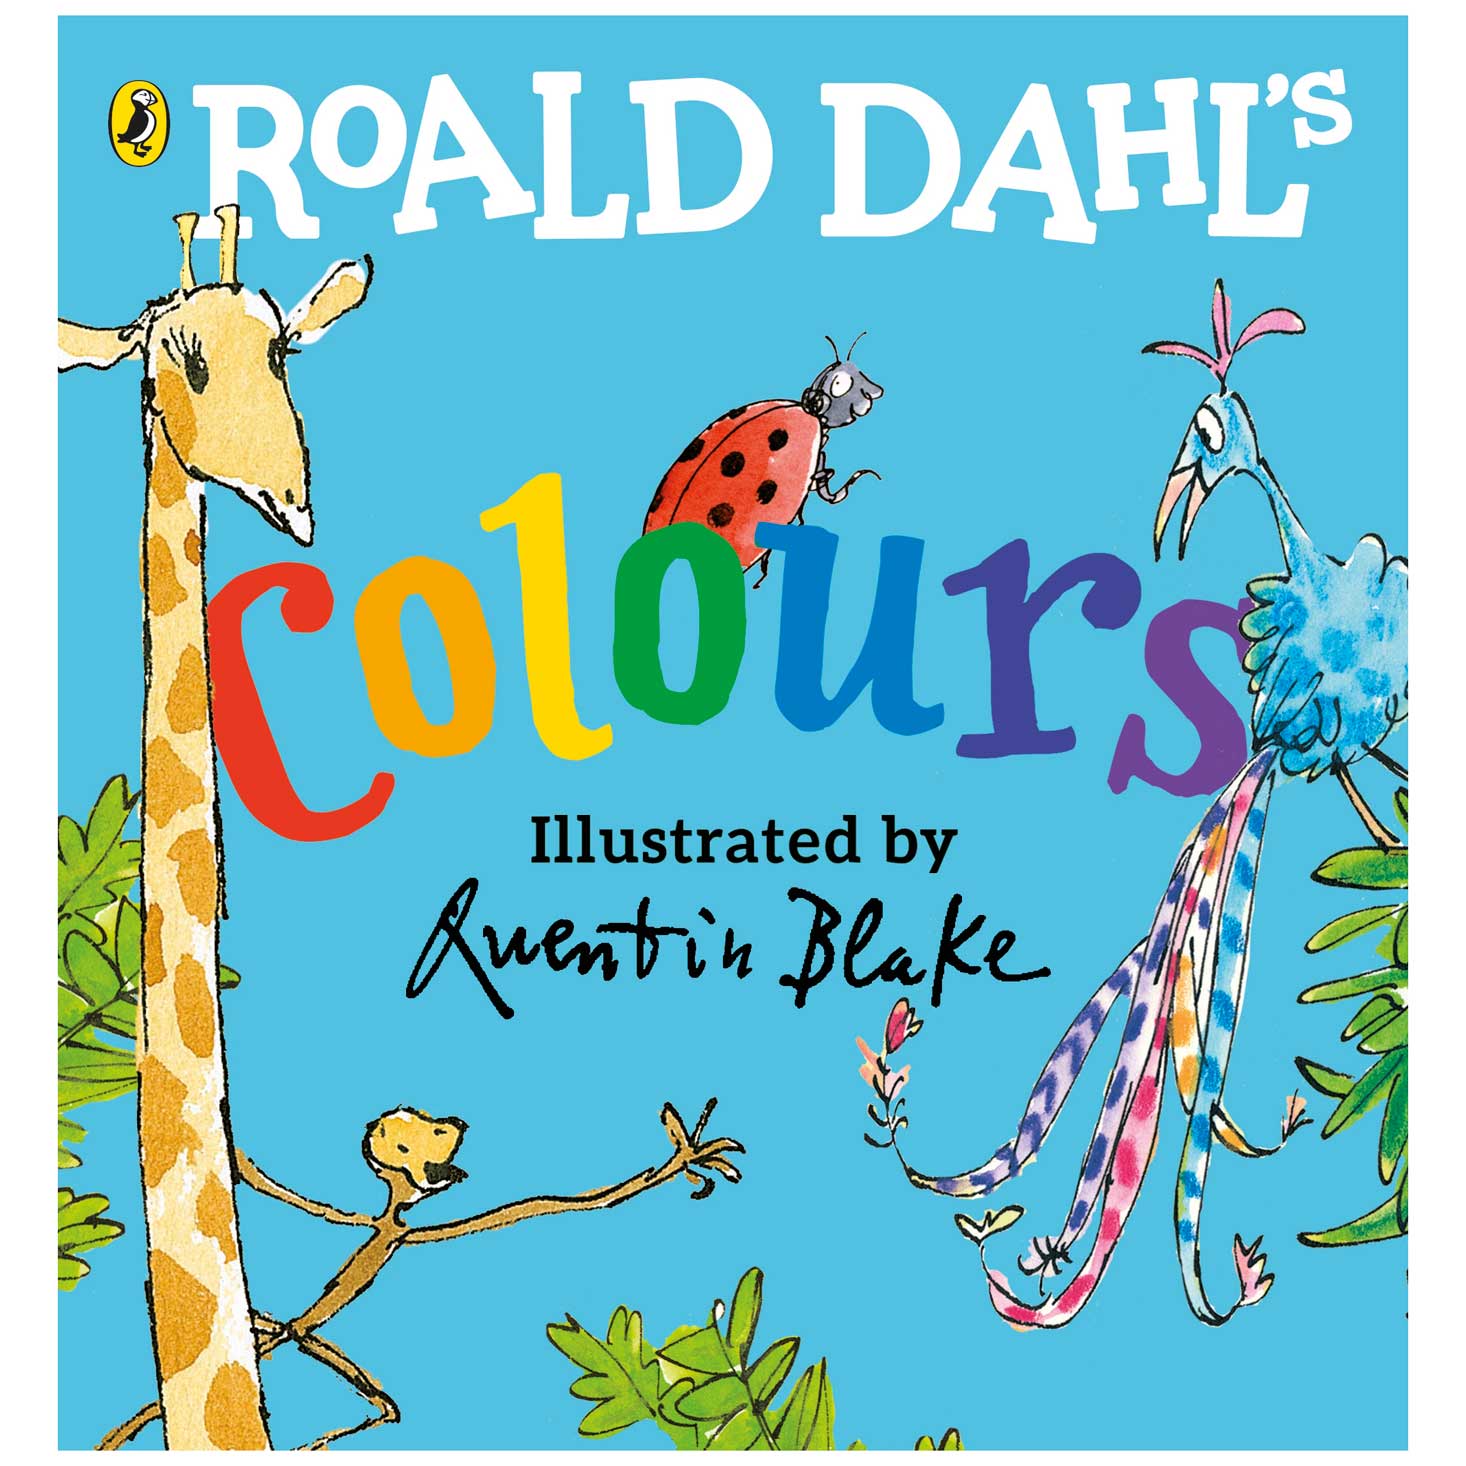 Roald Dahl's Colours, a board book for toddlers